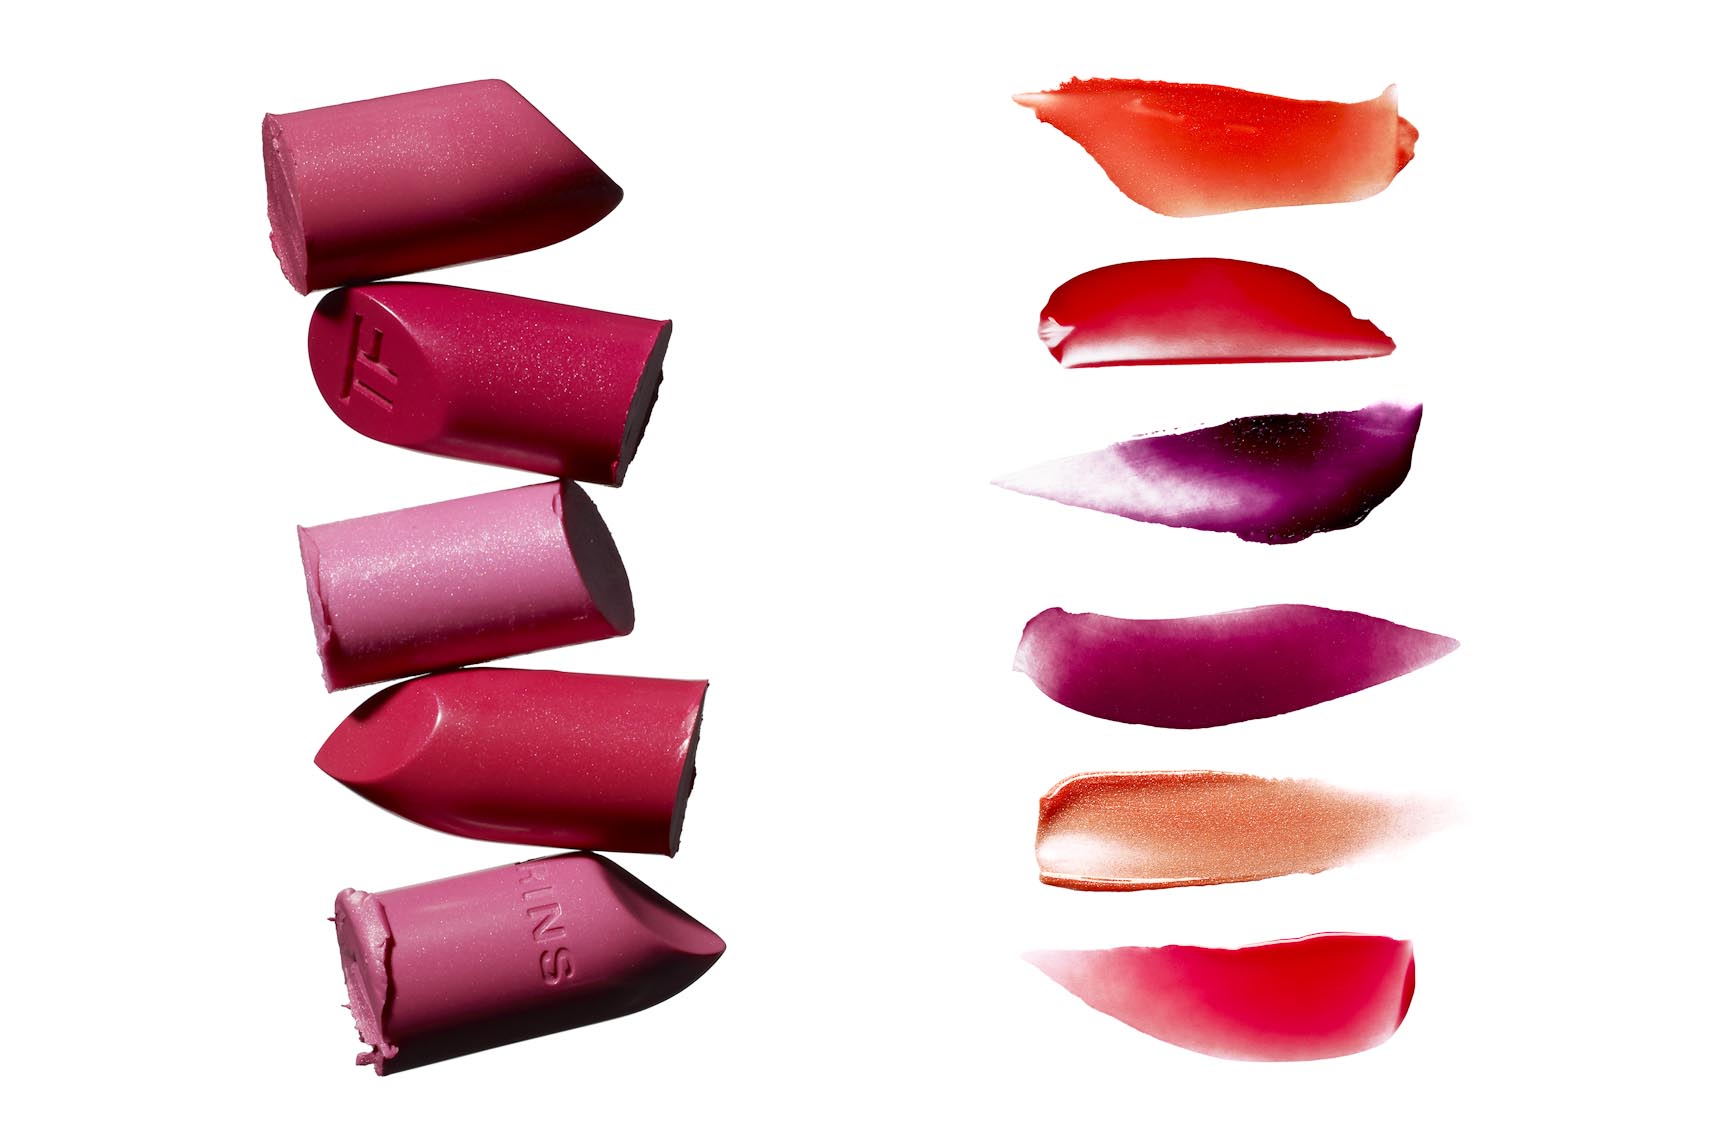 Cosmetics, Lipsticks and Lipgloss Swooshes - Mike Lorrig